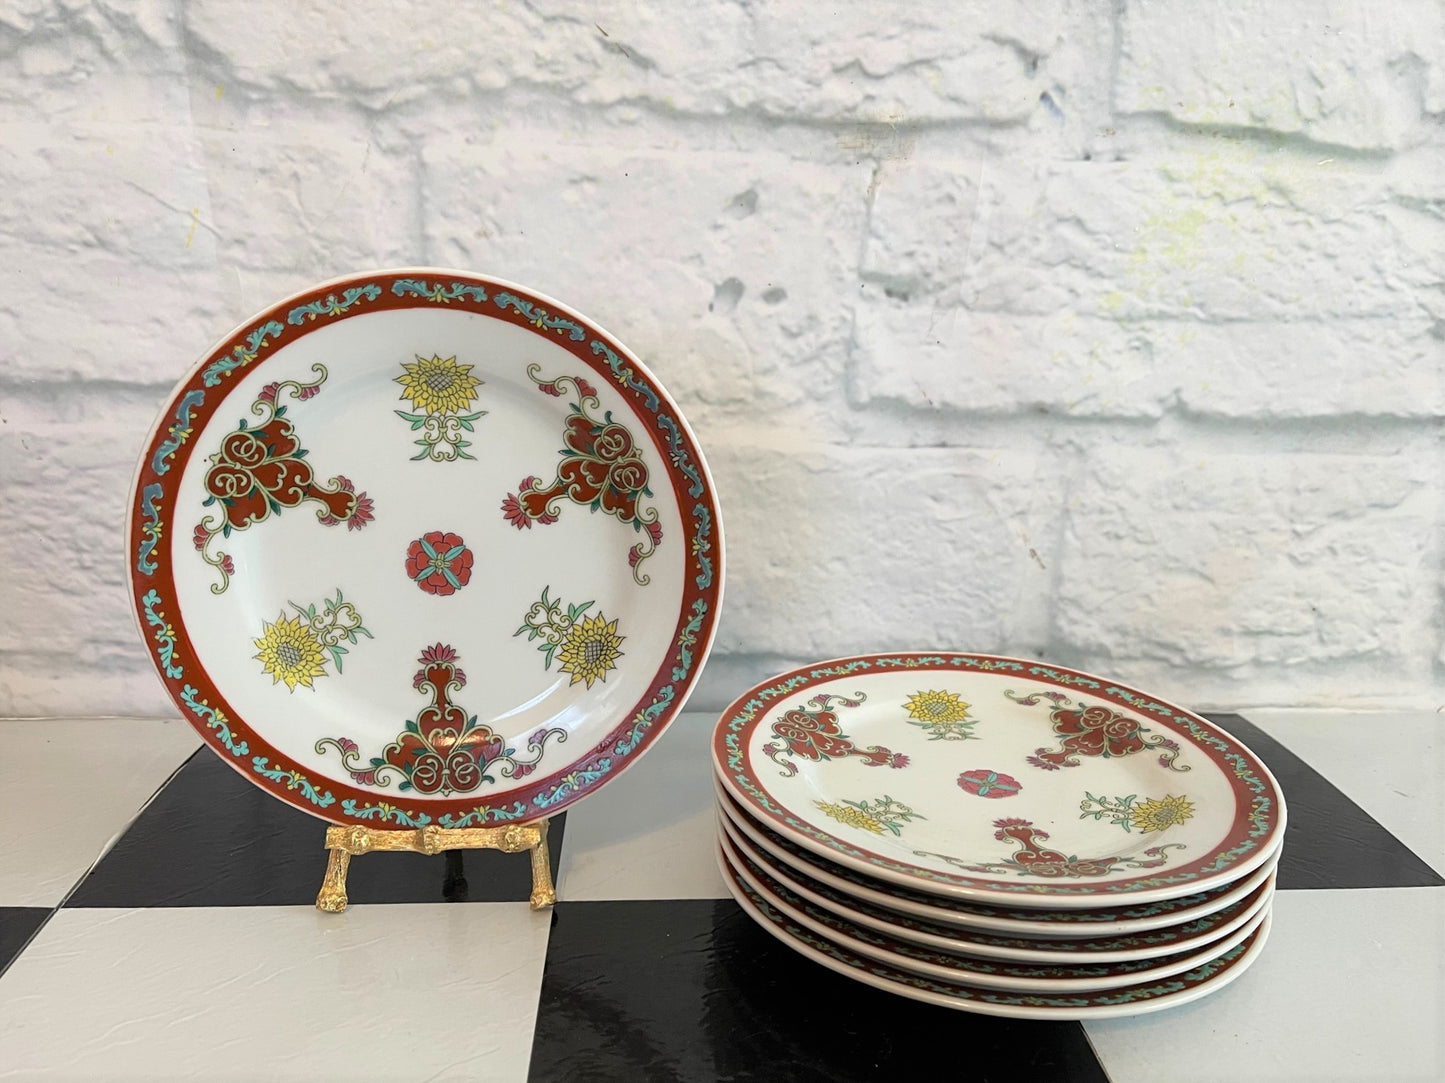 Set of 6 Vintage Chinoiserie Plates